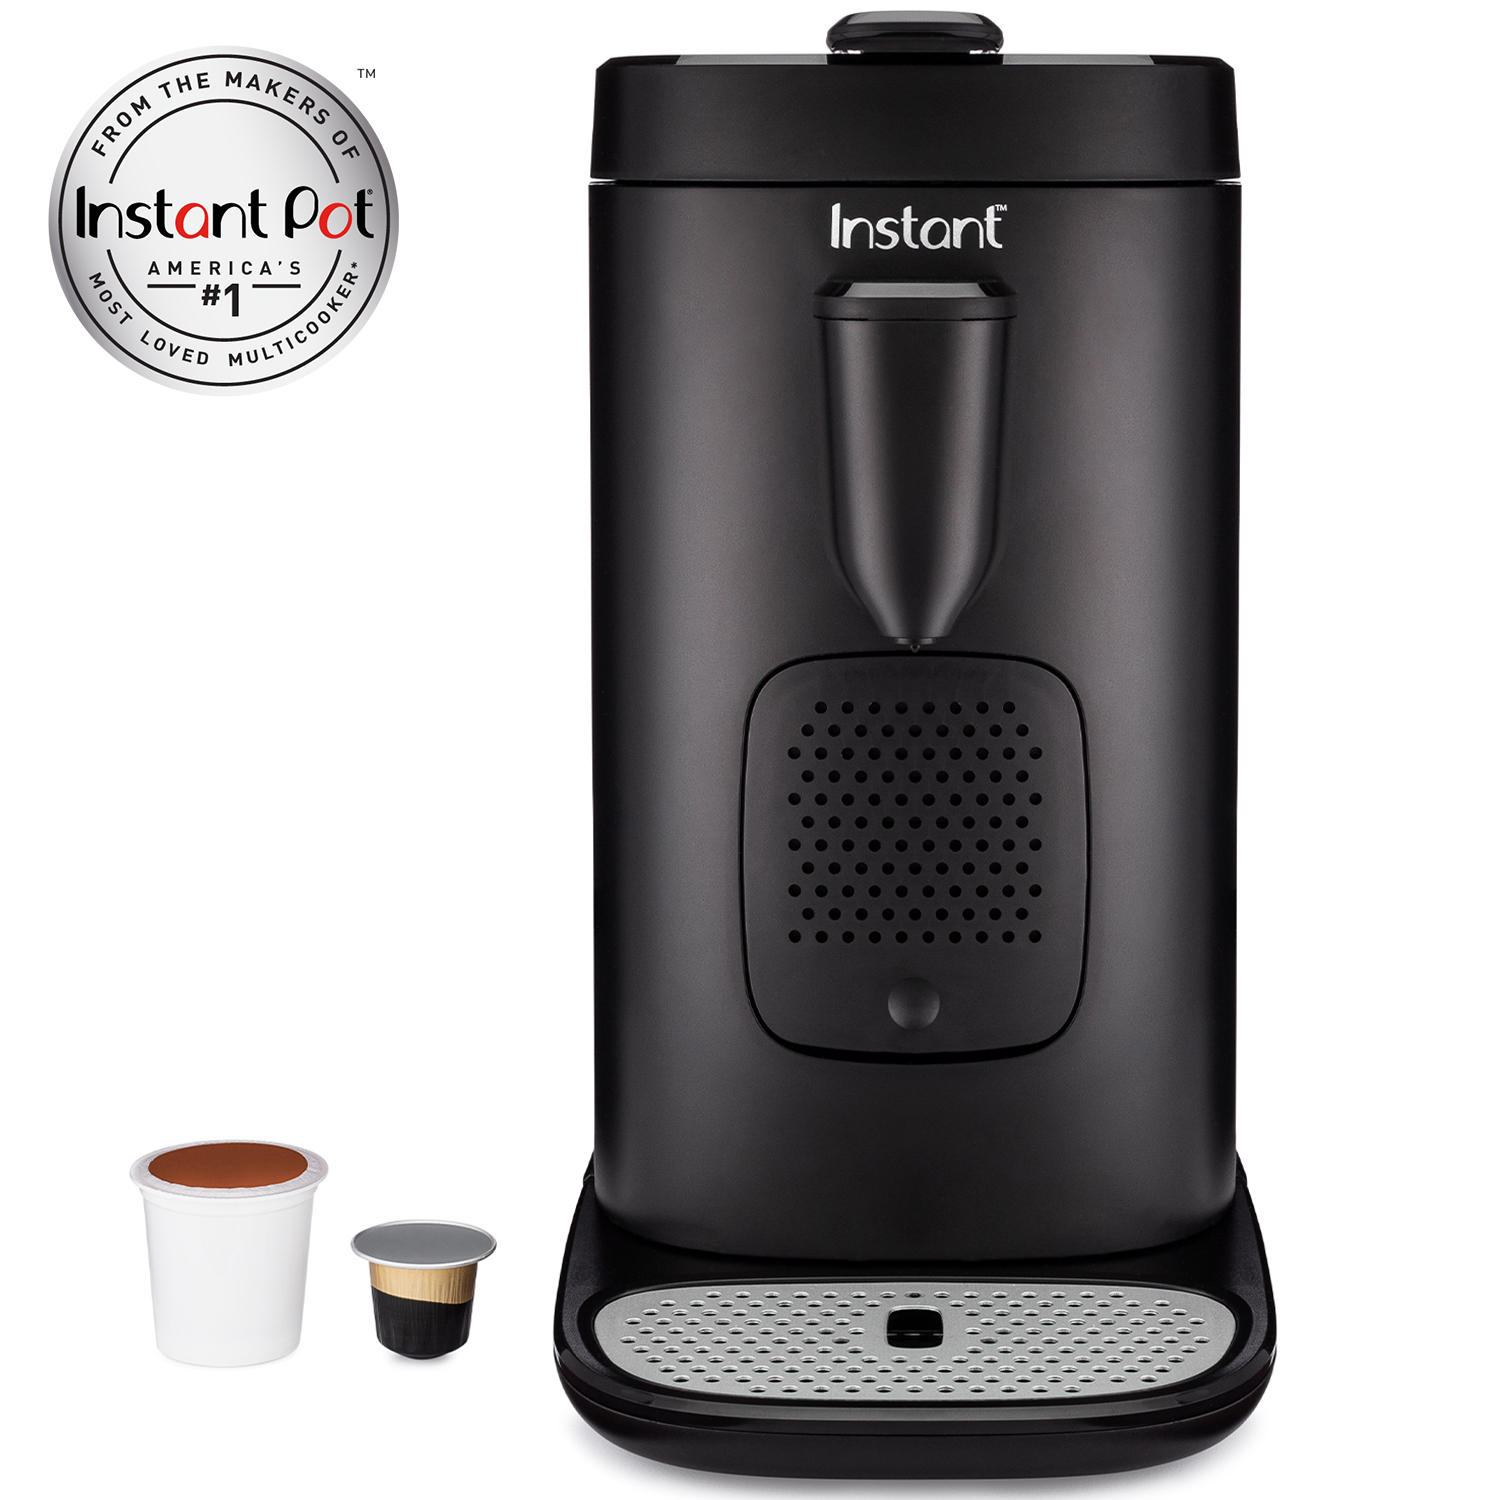 Instant Pod 2-in-1 Coffee and Espresso Maker Back On Sale SamsClub.com $69.98 Free Shipping for Plus Members or Pick up